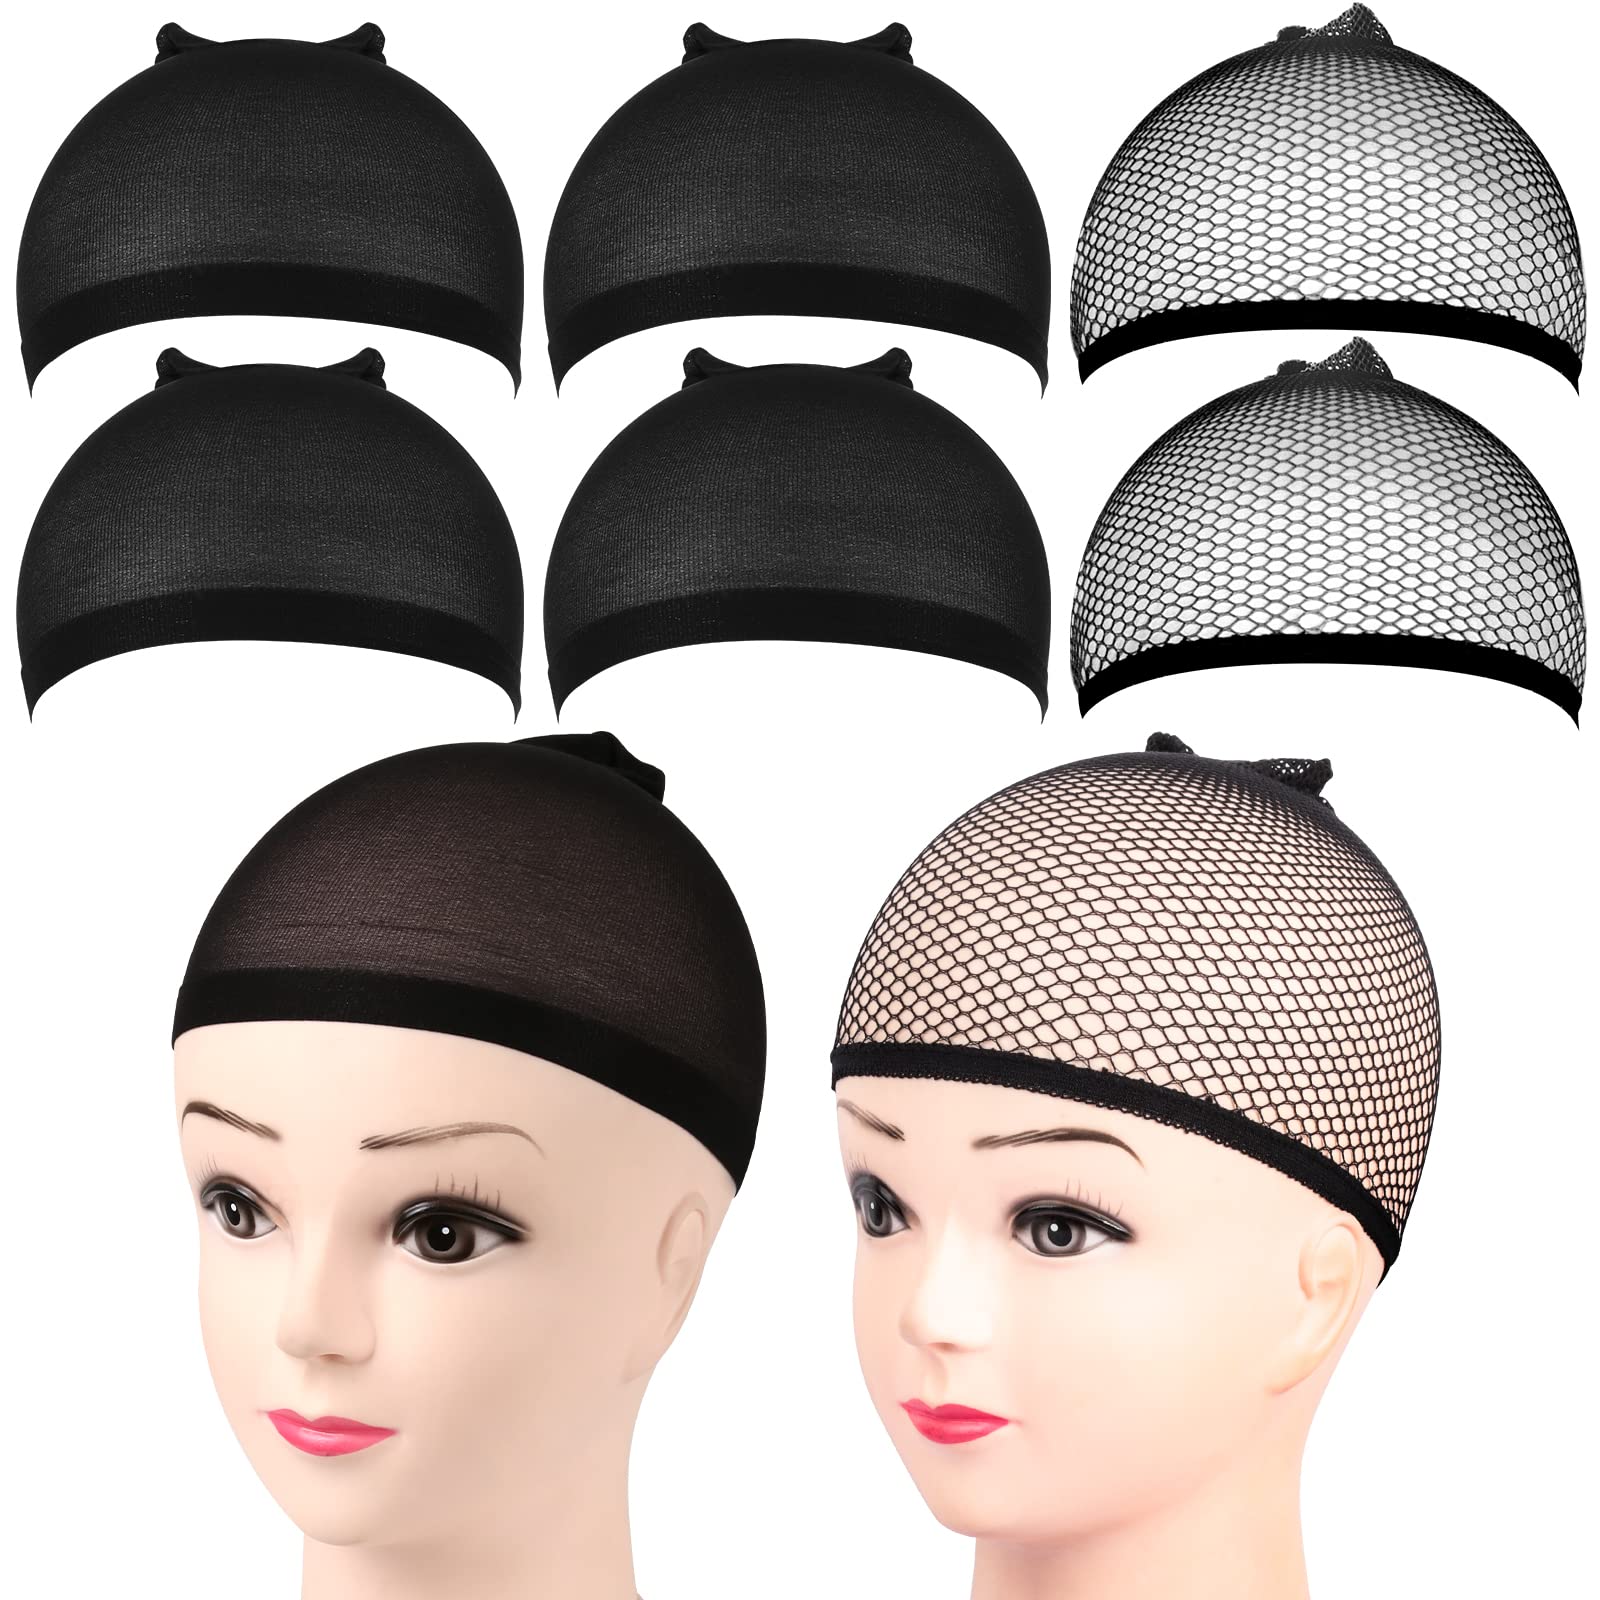 3PCS/lot In Stock Cheap Breathable Lace Cap Wigs For Make Wig Net Wig Cap  Wig Caps Human Hair Black Women